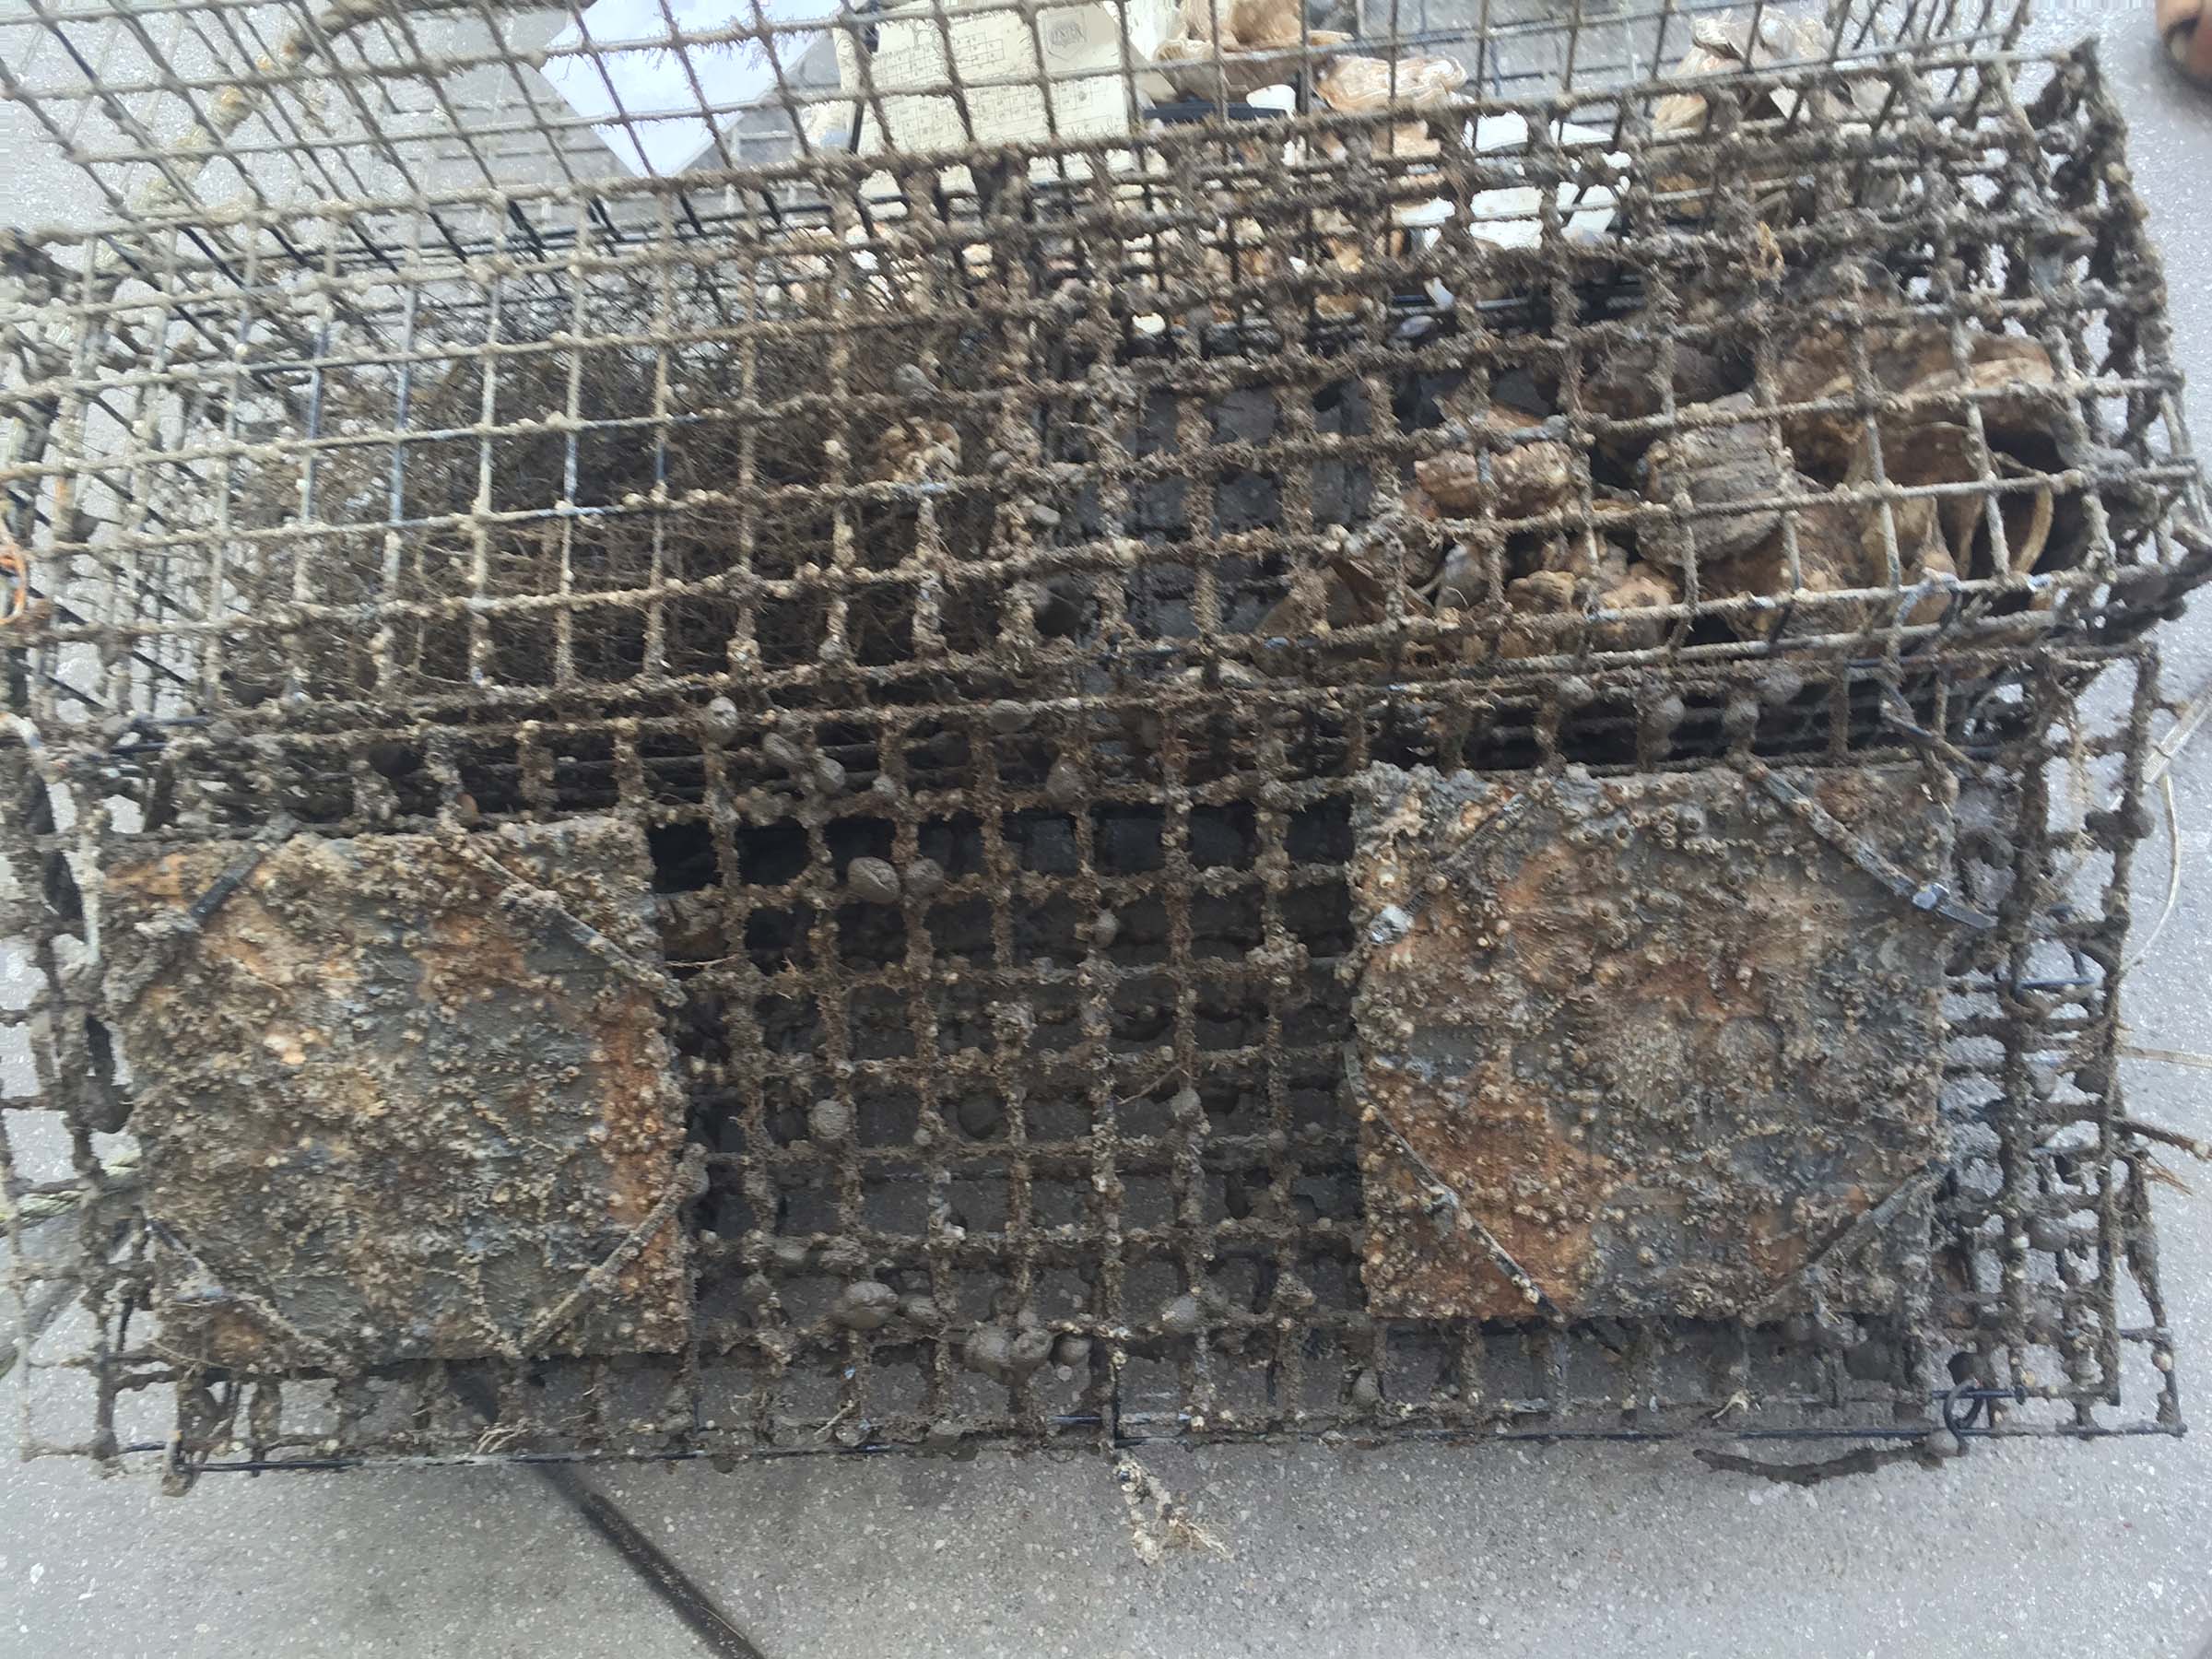 An oyster box used to help breed Oysters in the Hudson River